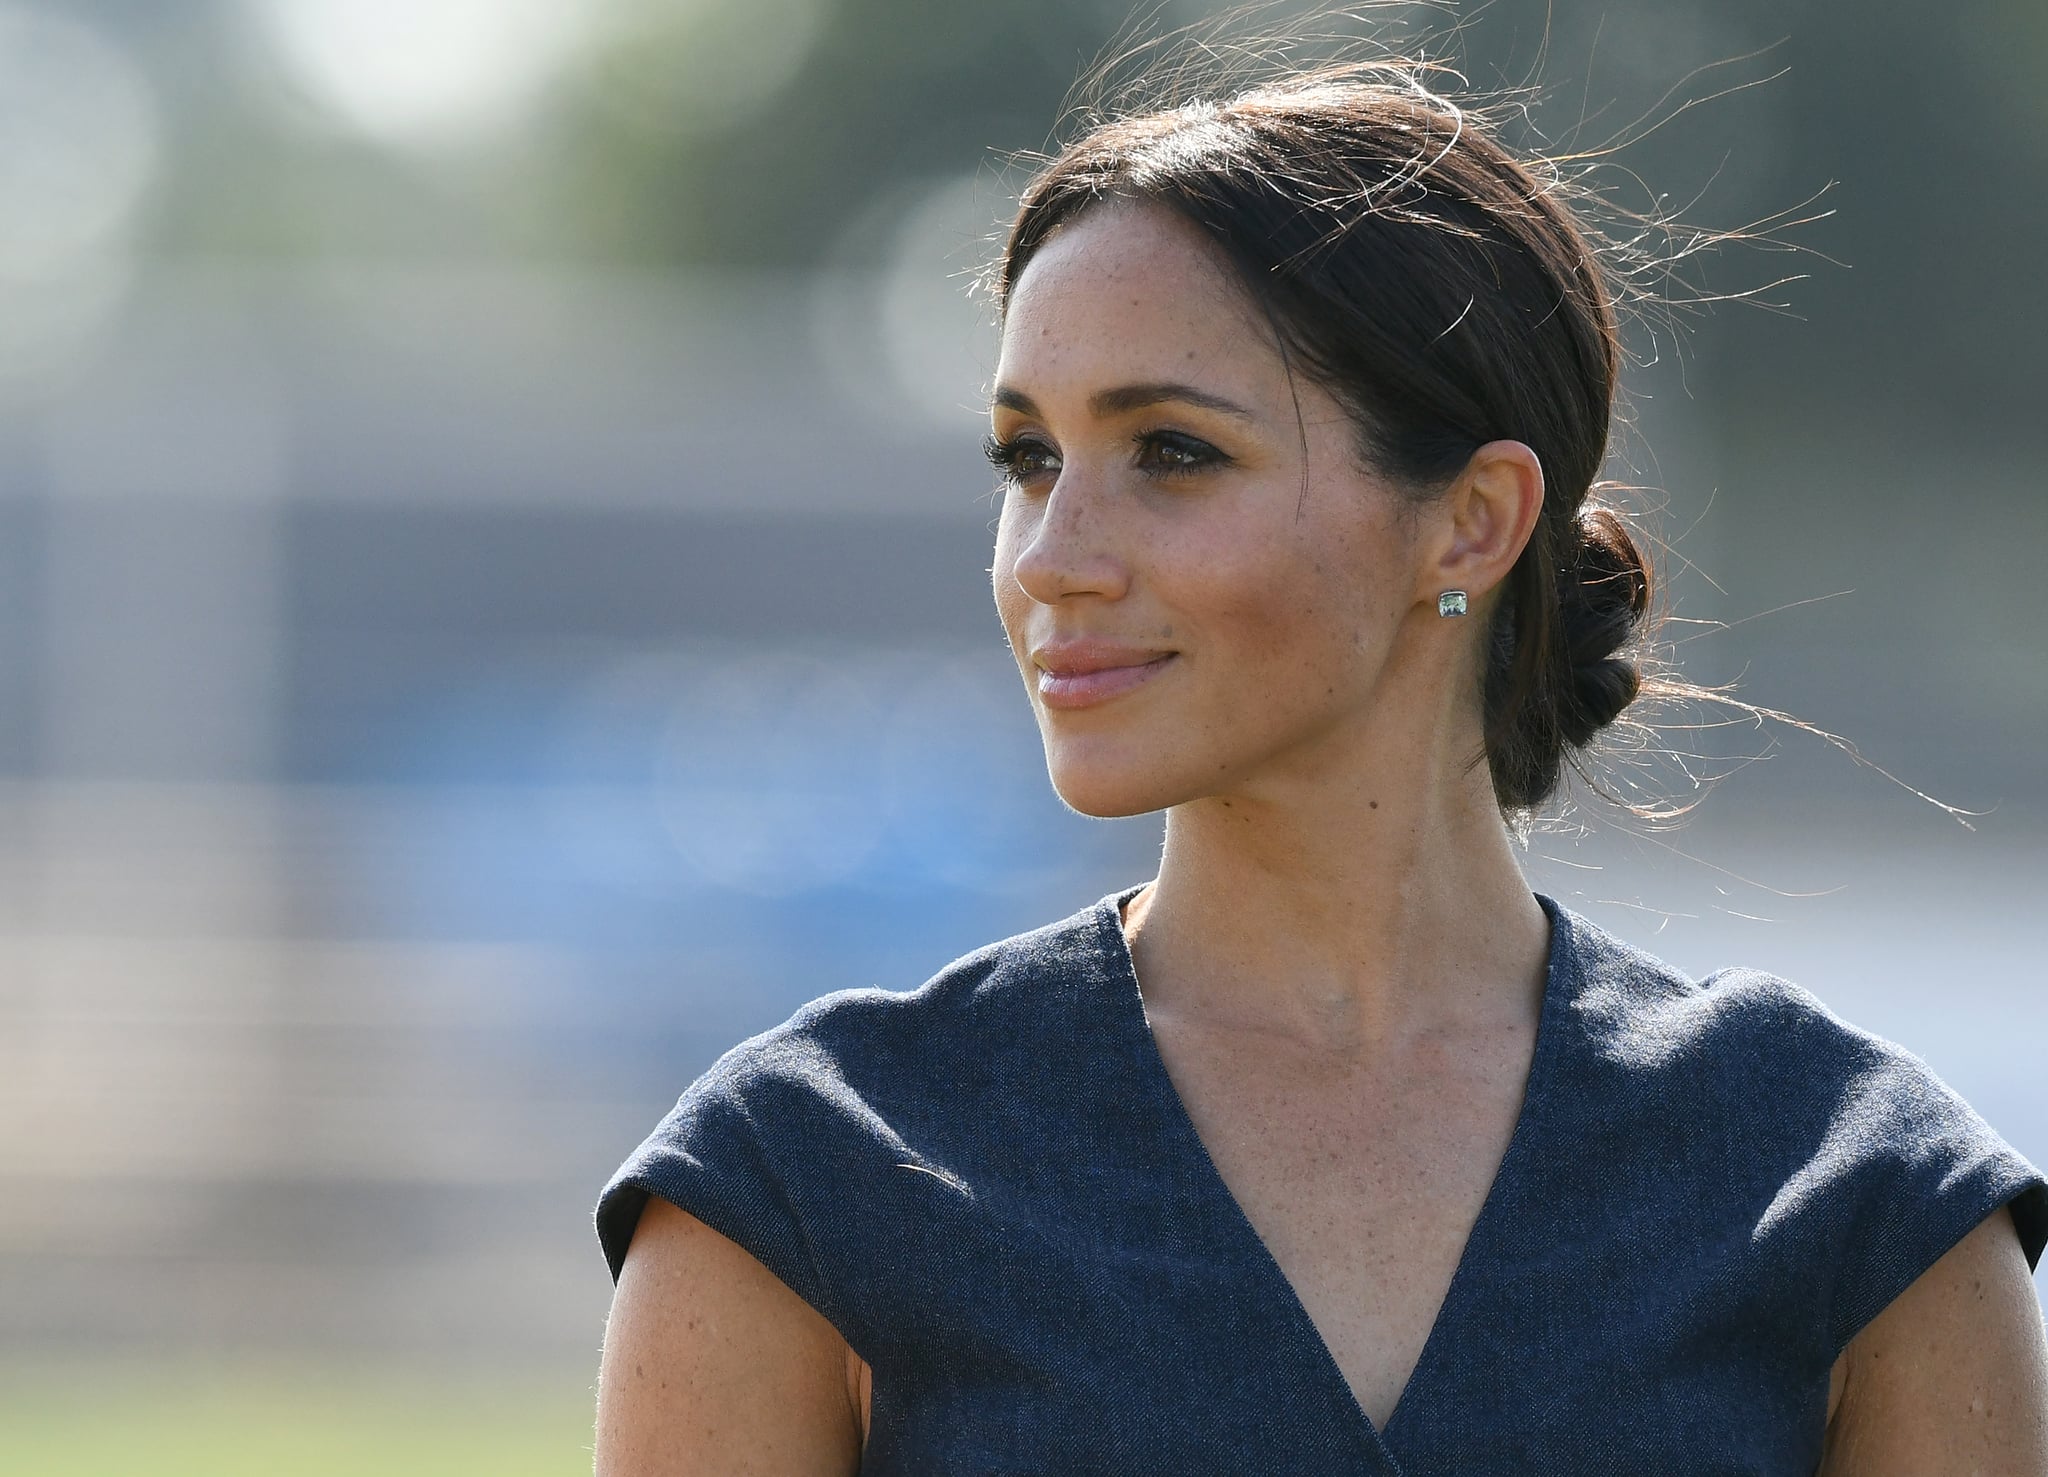 Meghan Markle Is Set to Make History When She Votes in the 2020 US Presidential Election